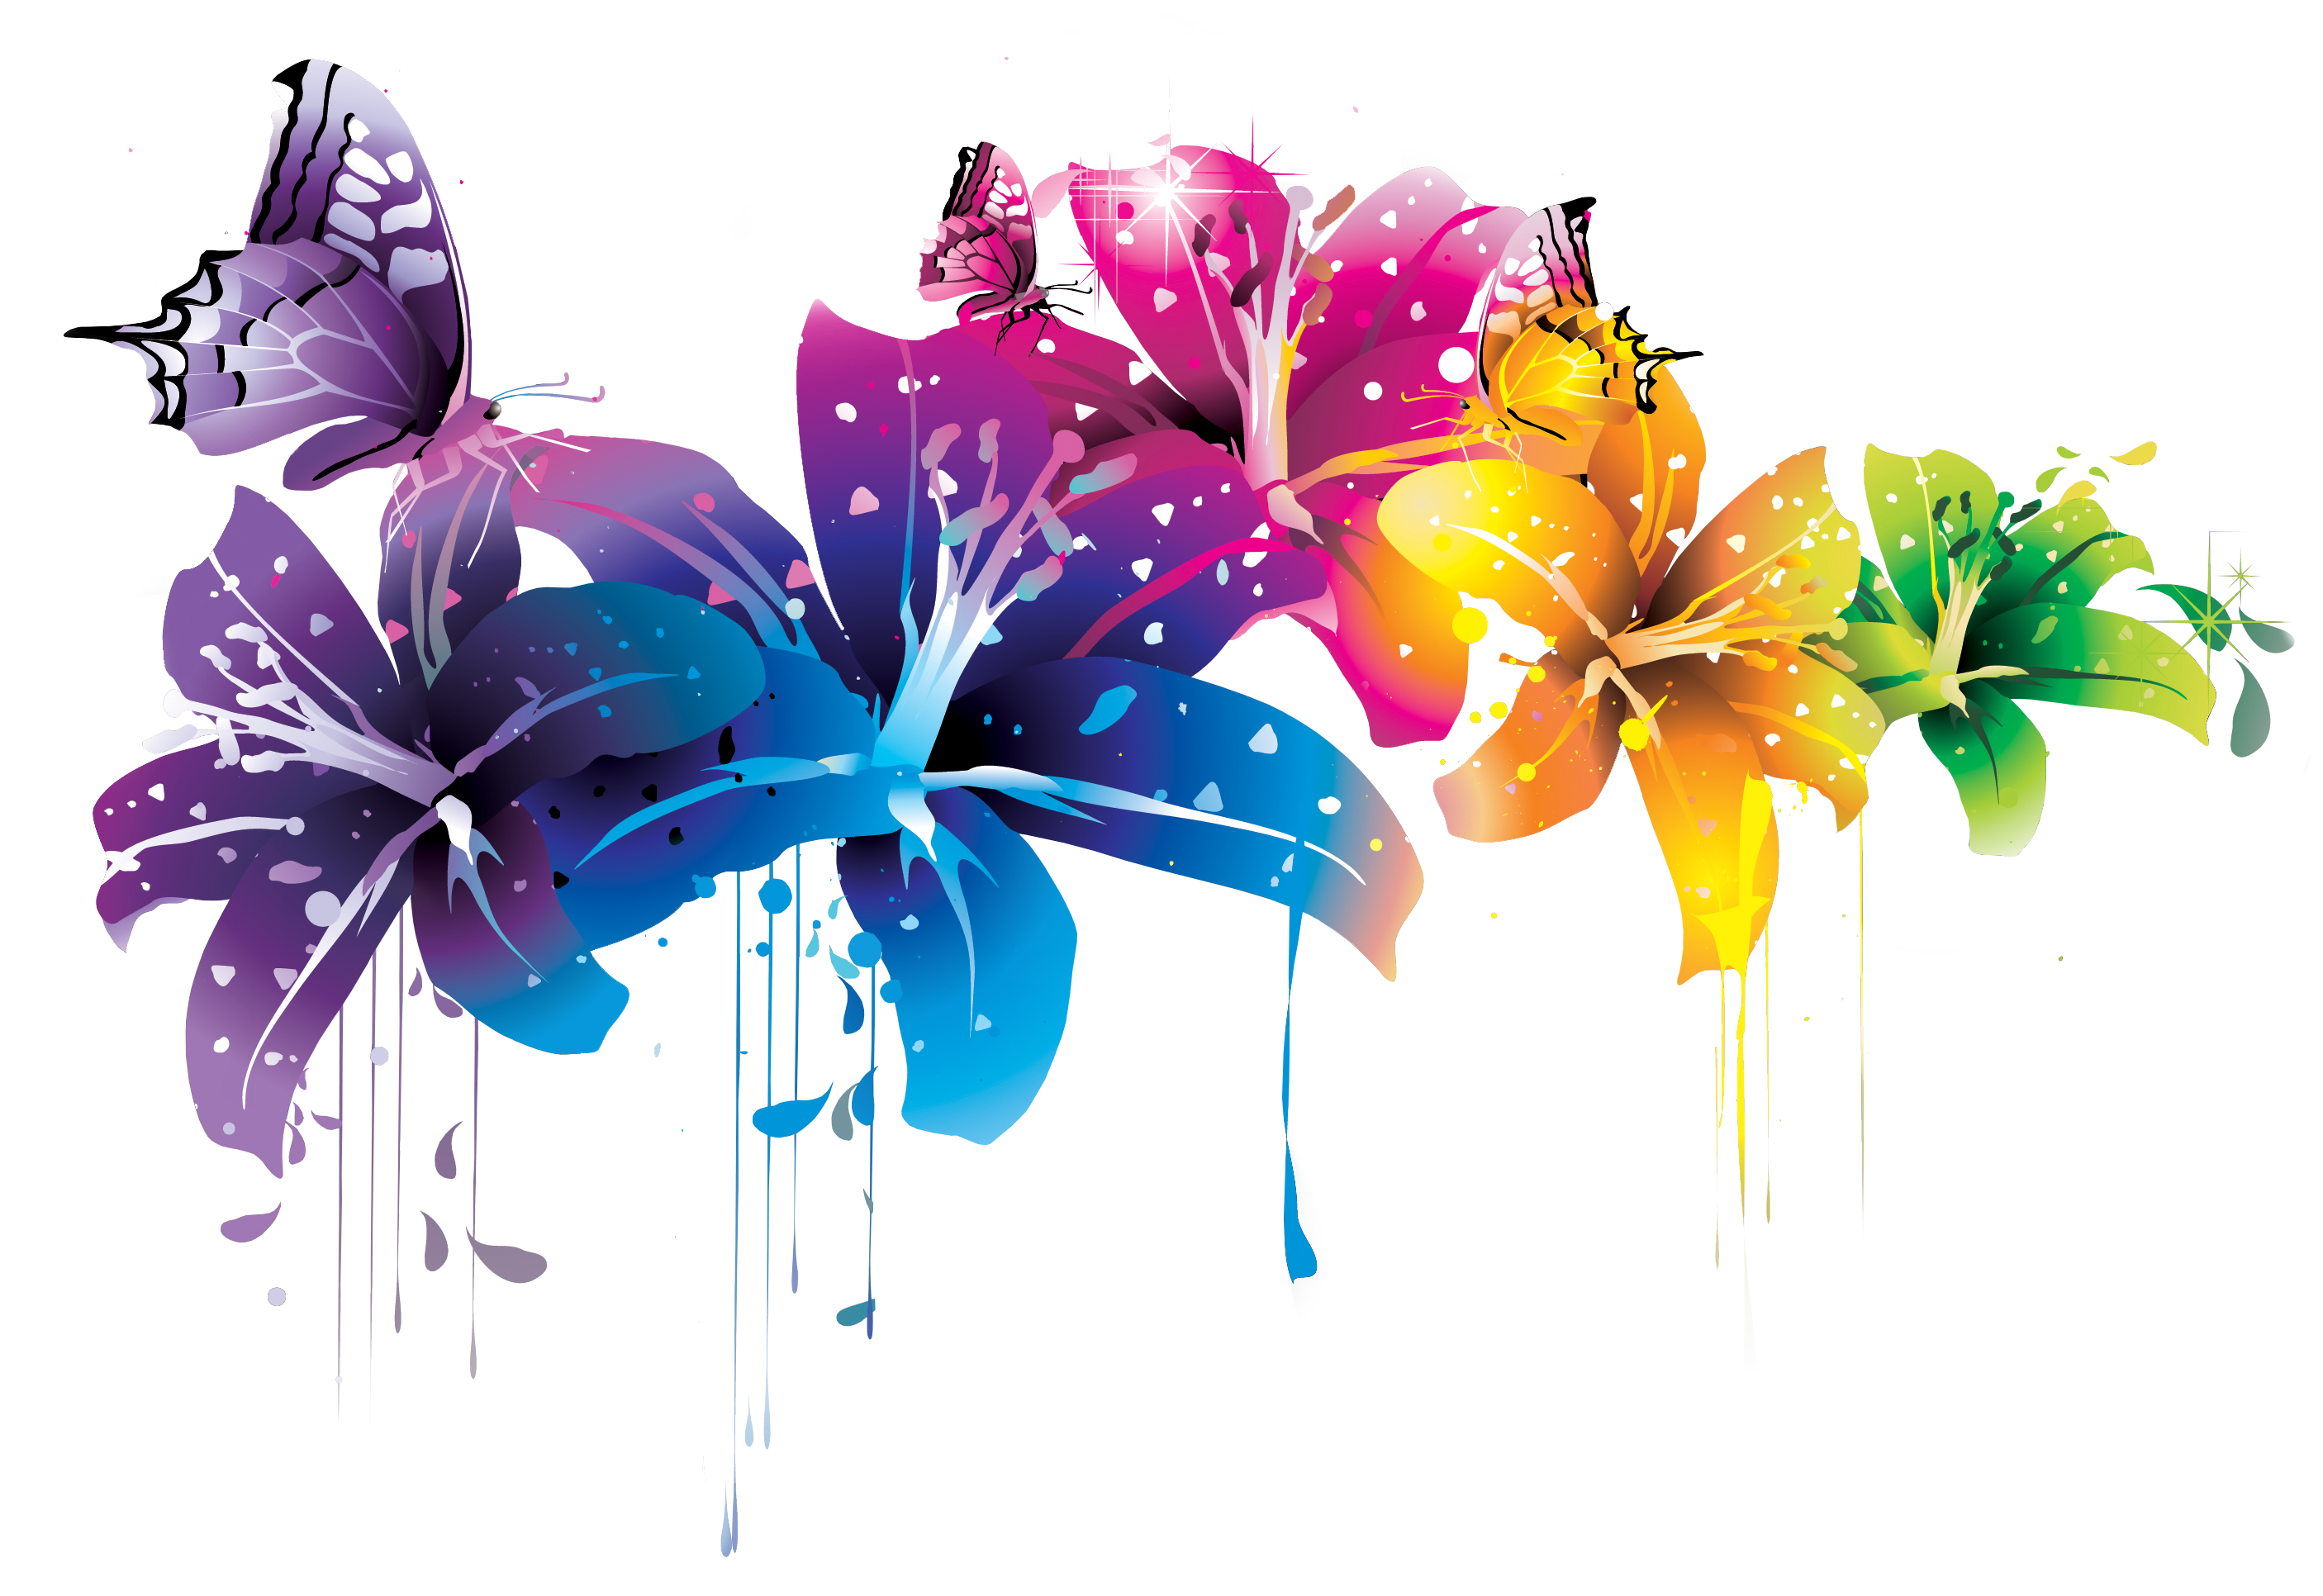 floral vector png